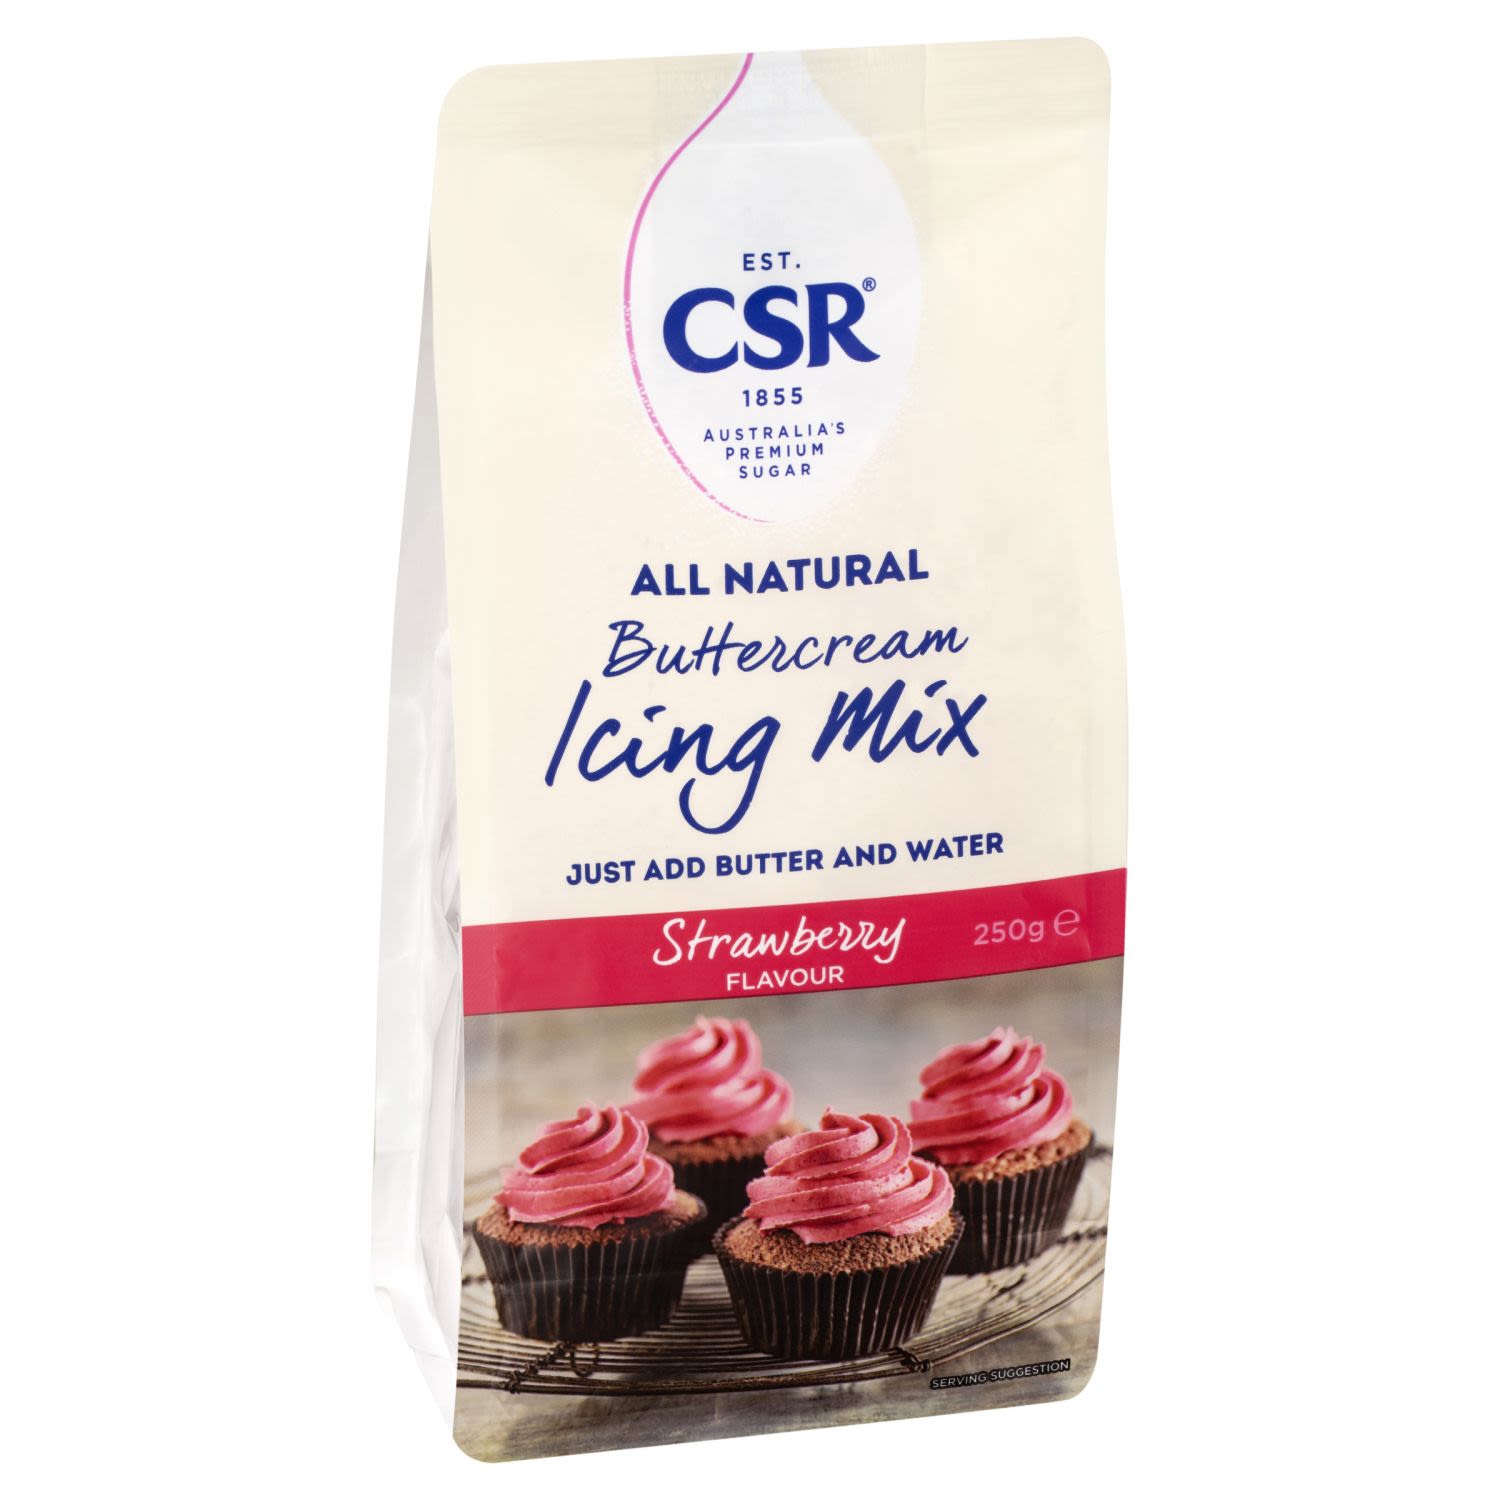 CSR All Natural Buttercream Icing Mix Strawberry is the easiest way to add a layer of natural strawberry flavour to your desserts. This pack is ideal for icing a 20-23cm cake, 12 cupcakes or 24 mini cupcakes. Made with beetroot powder for a rich pink colour, this icing mix is gluten free and contains no added colours, flavours or preservatives. Quick and easy to make, this icing mix is a great choice for any celebration.<br /> <br /> <br /><br />Country of Origin: Packed in Australia from at least 93% Australian ingredients.